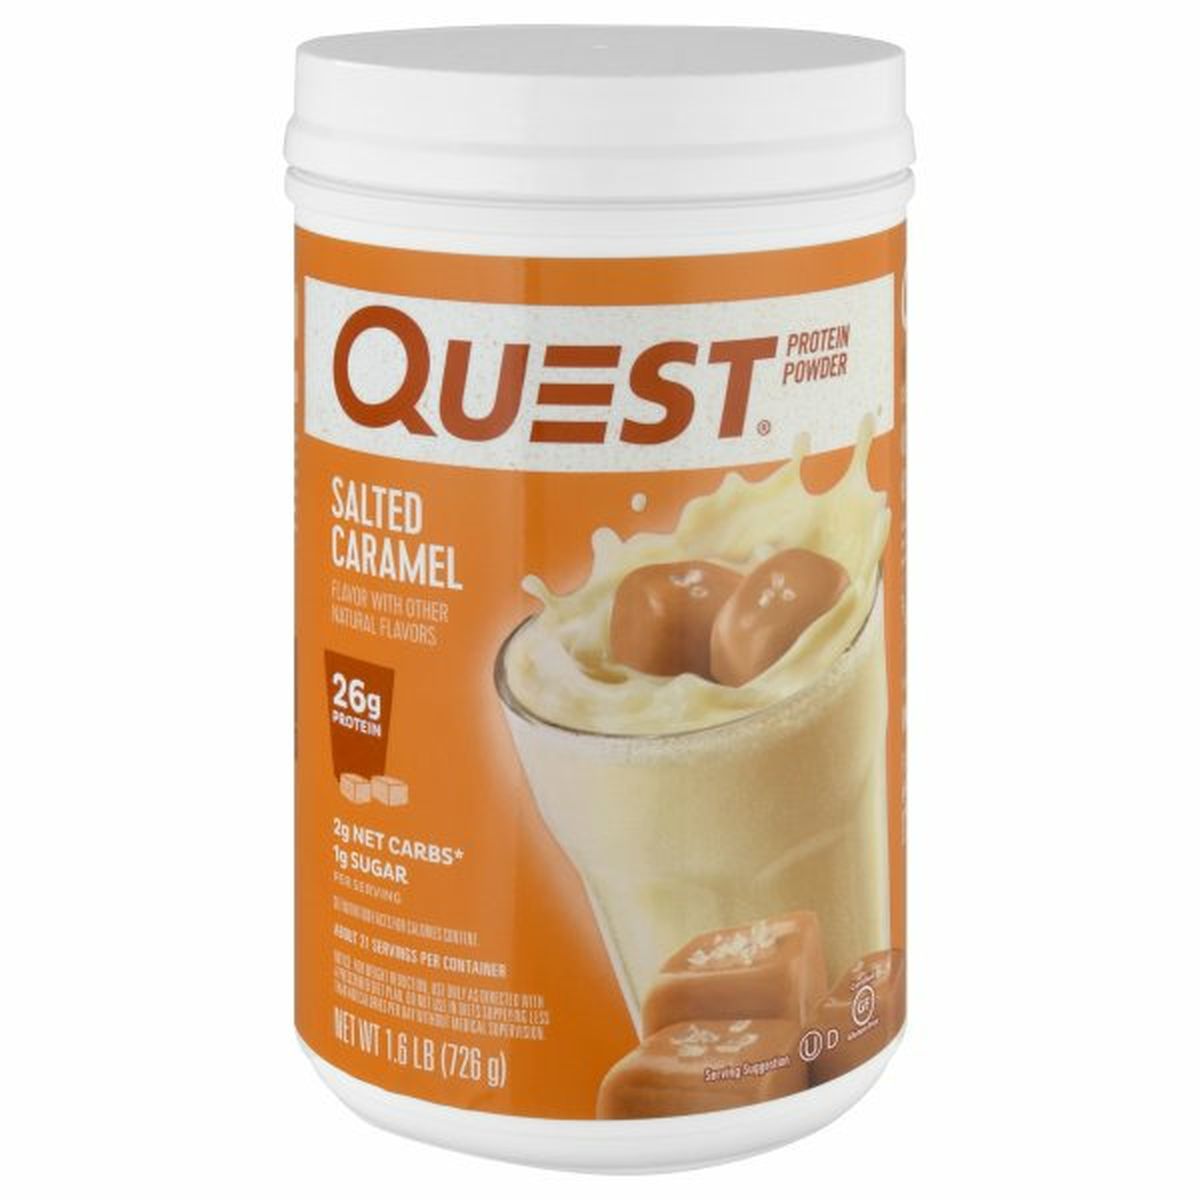 Calories in Quest Protein Powder, Salted Caramel